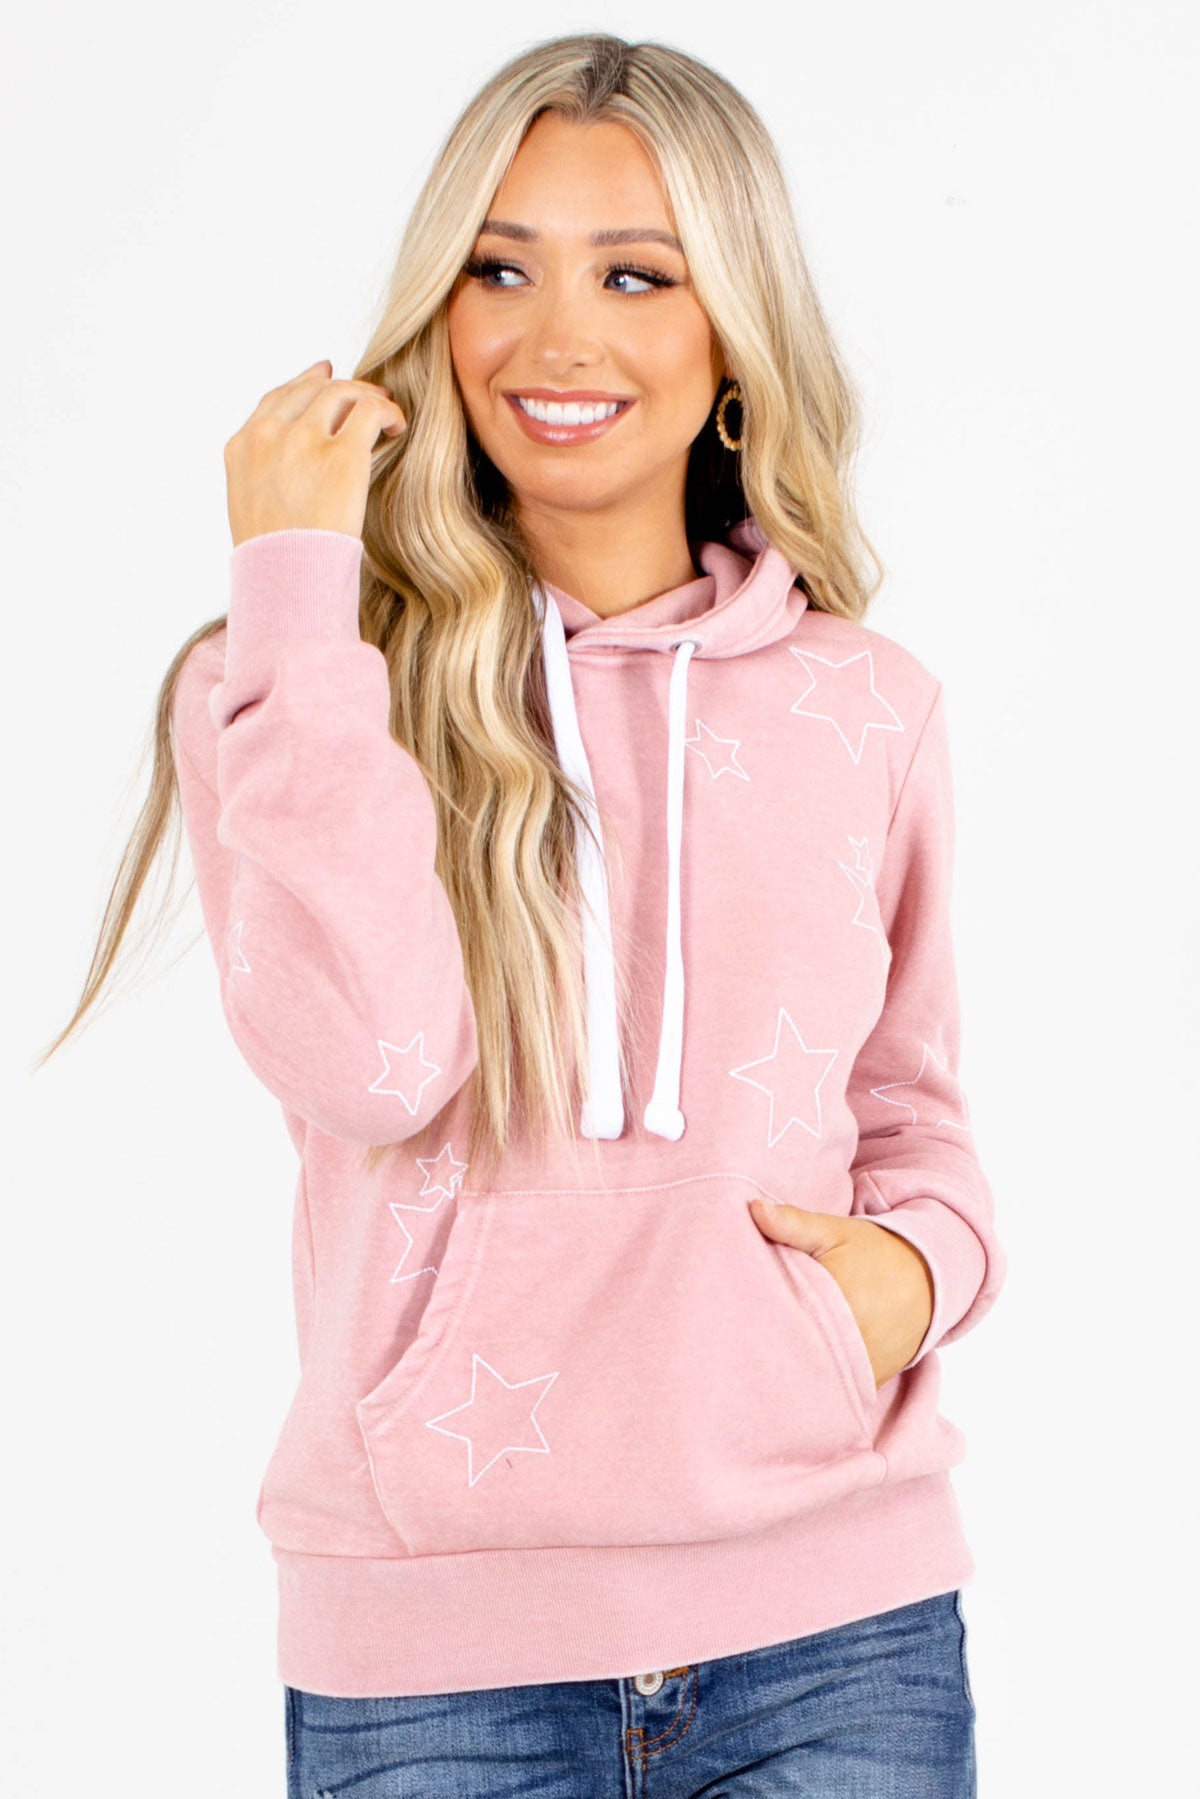 star patterned light pink hooded top for women